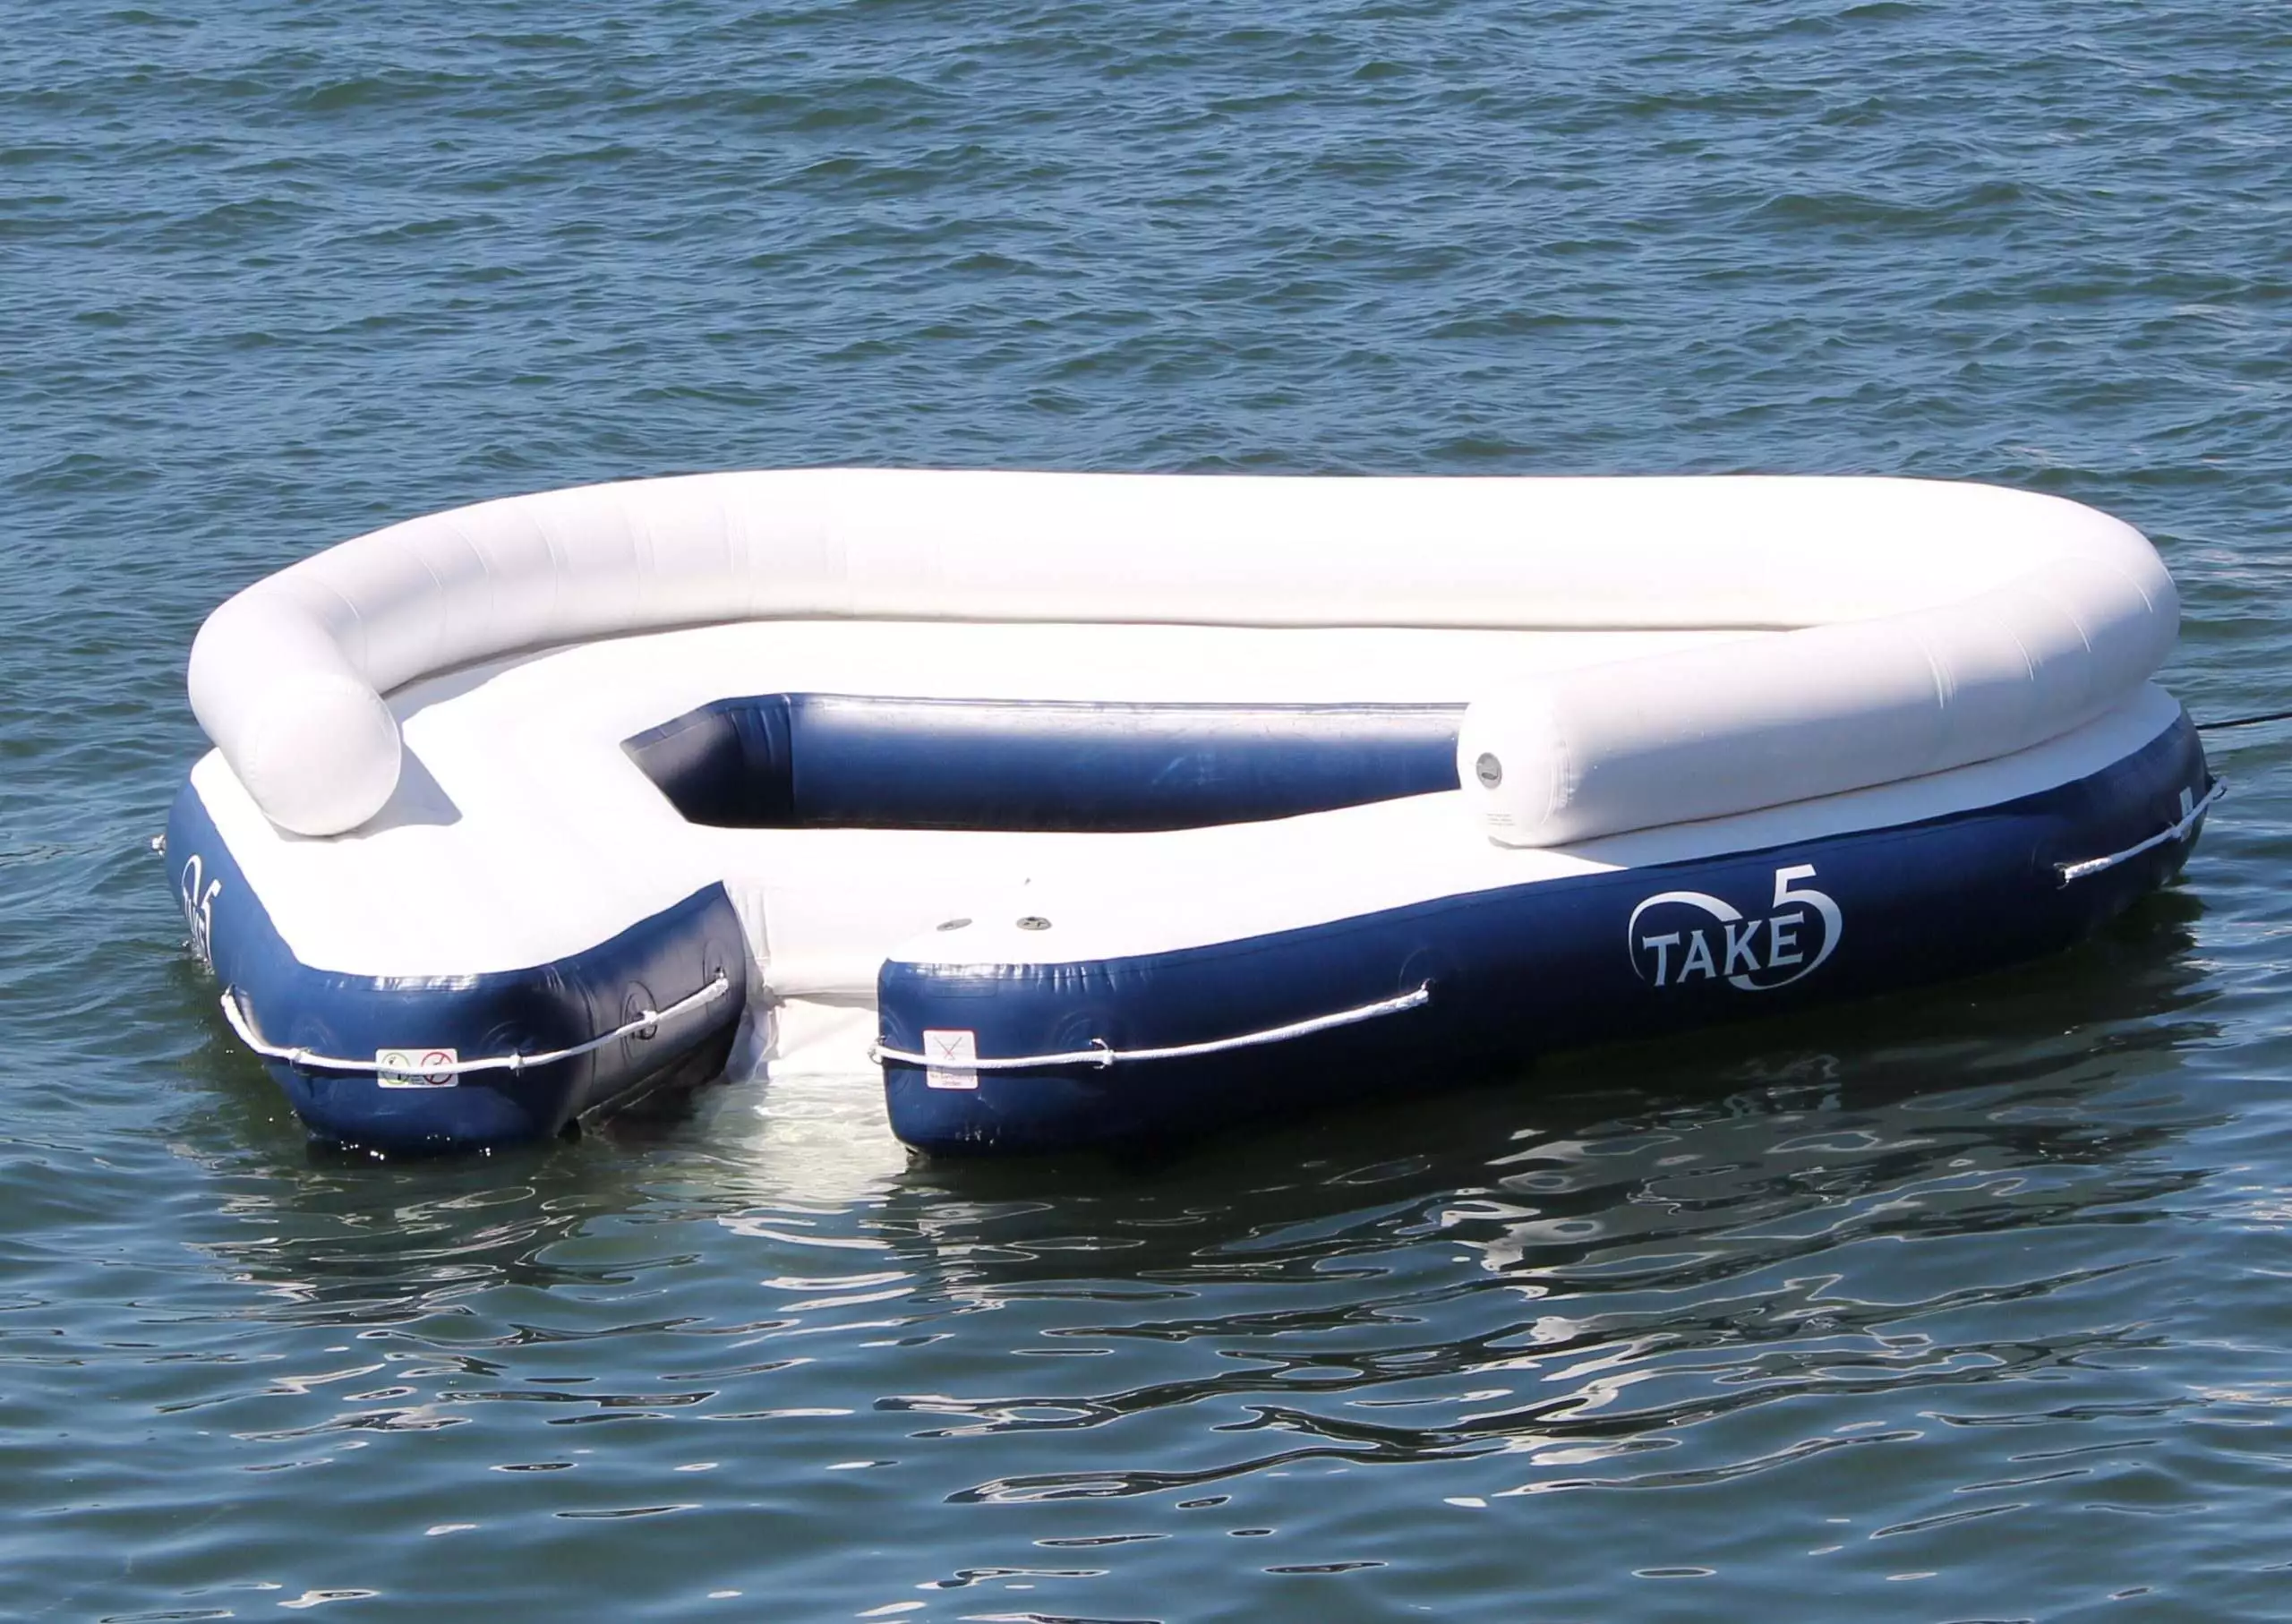 Custom Floating Oasis from charter yacht Take 5